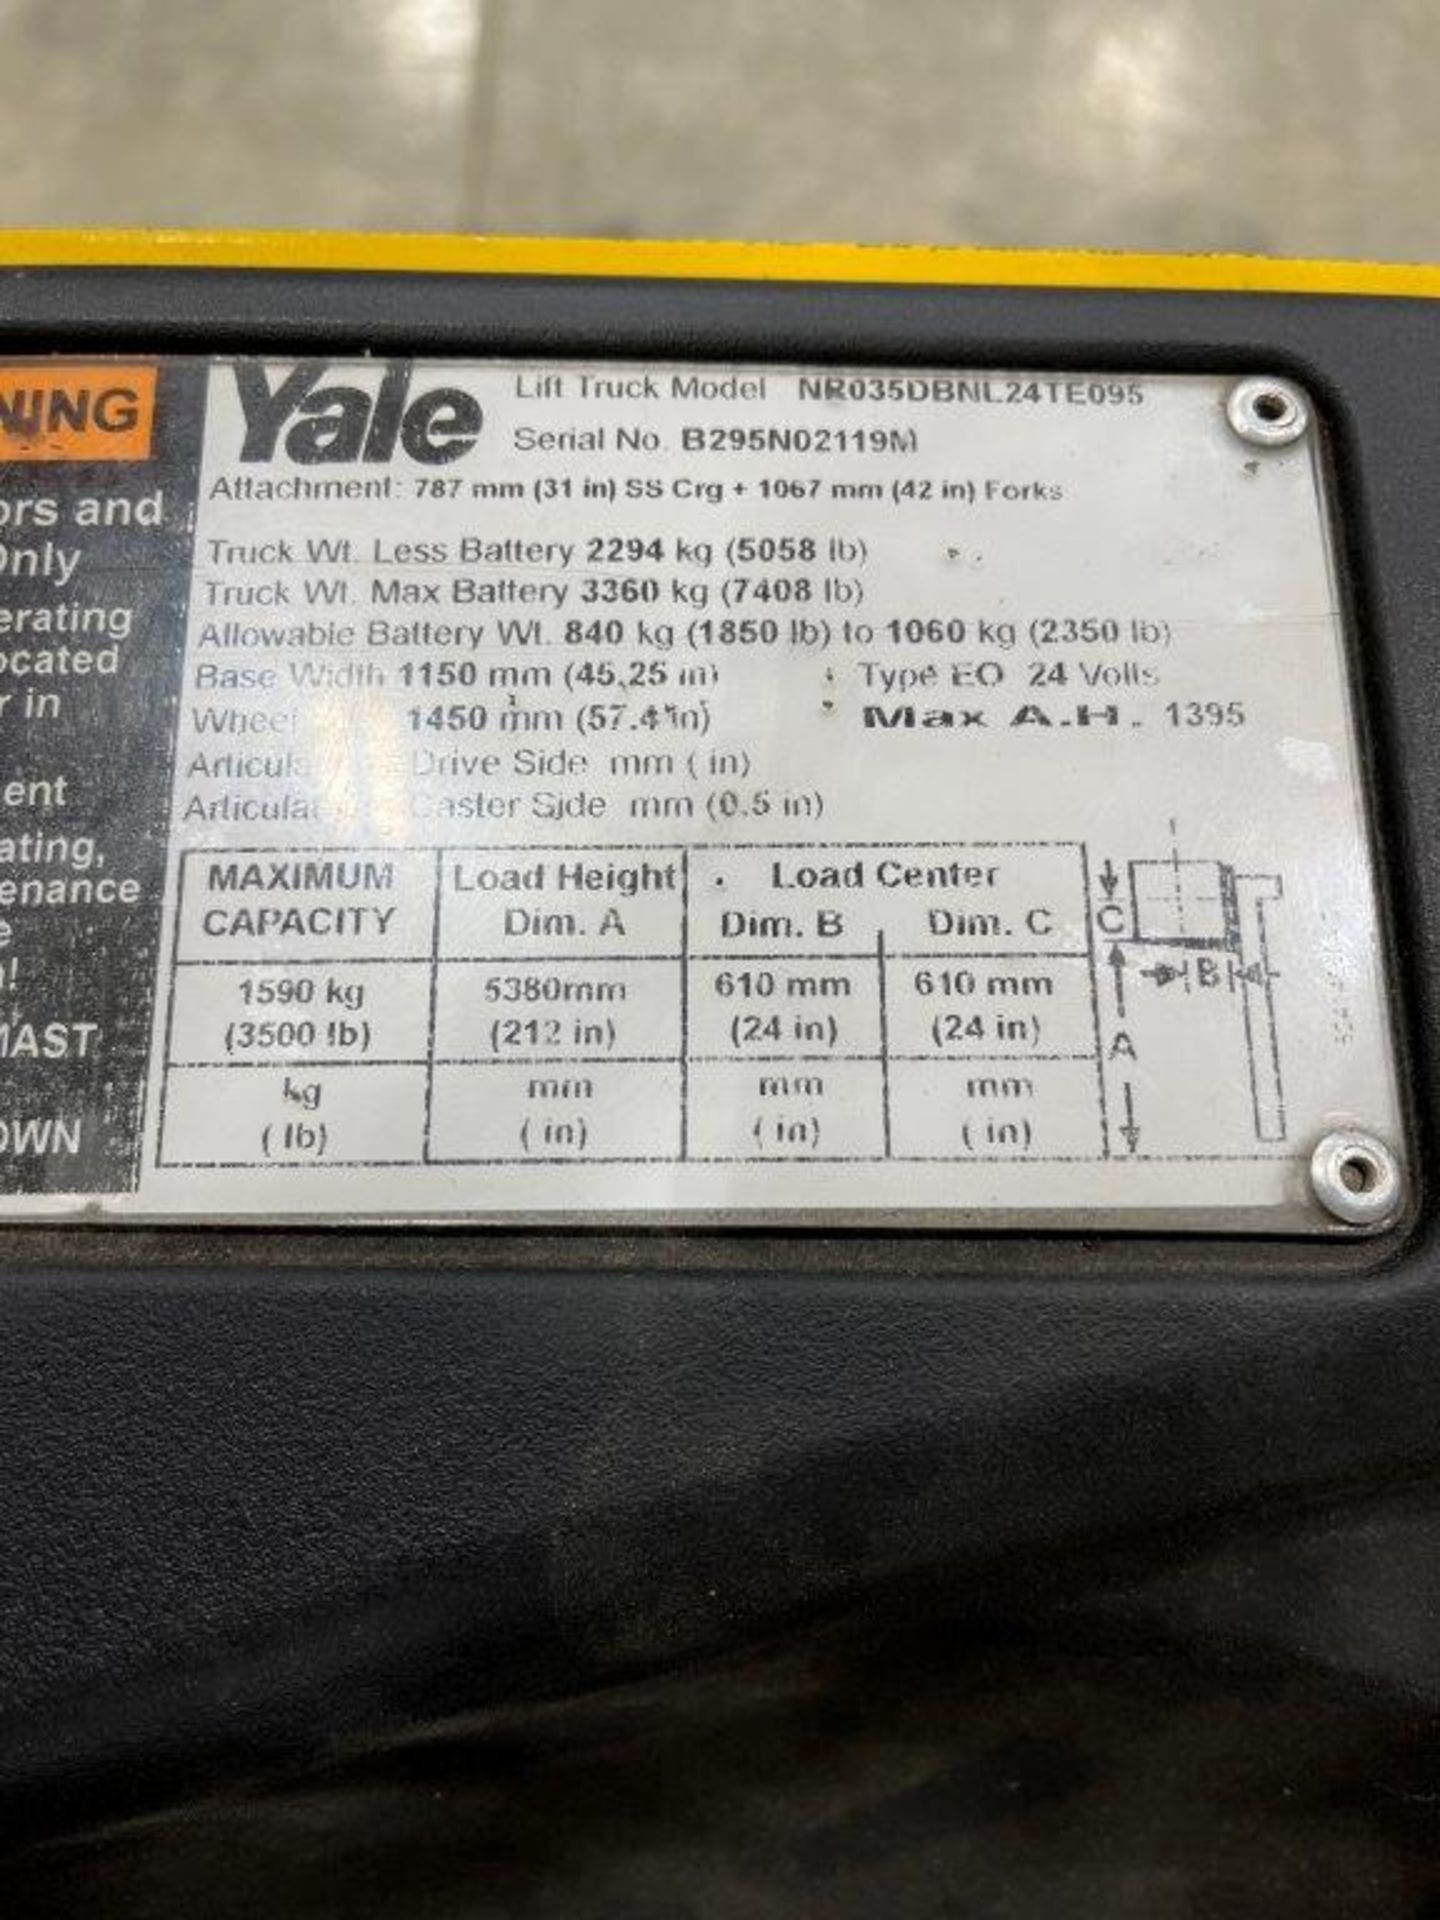 Yale NR035DBNL24TE095 3,500-Lb Electric Reach Stand Up Forklift, - Image 9 of 10